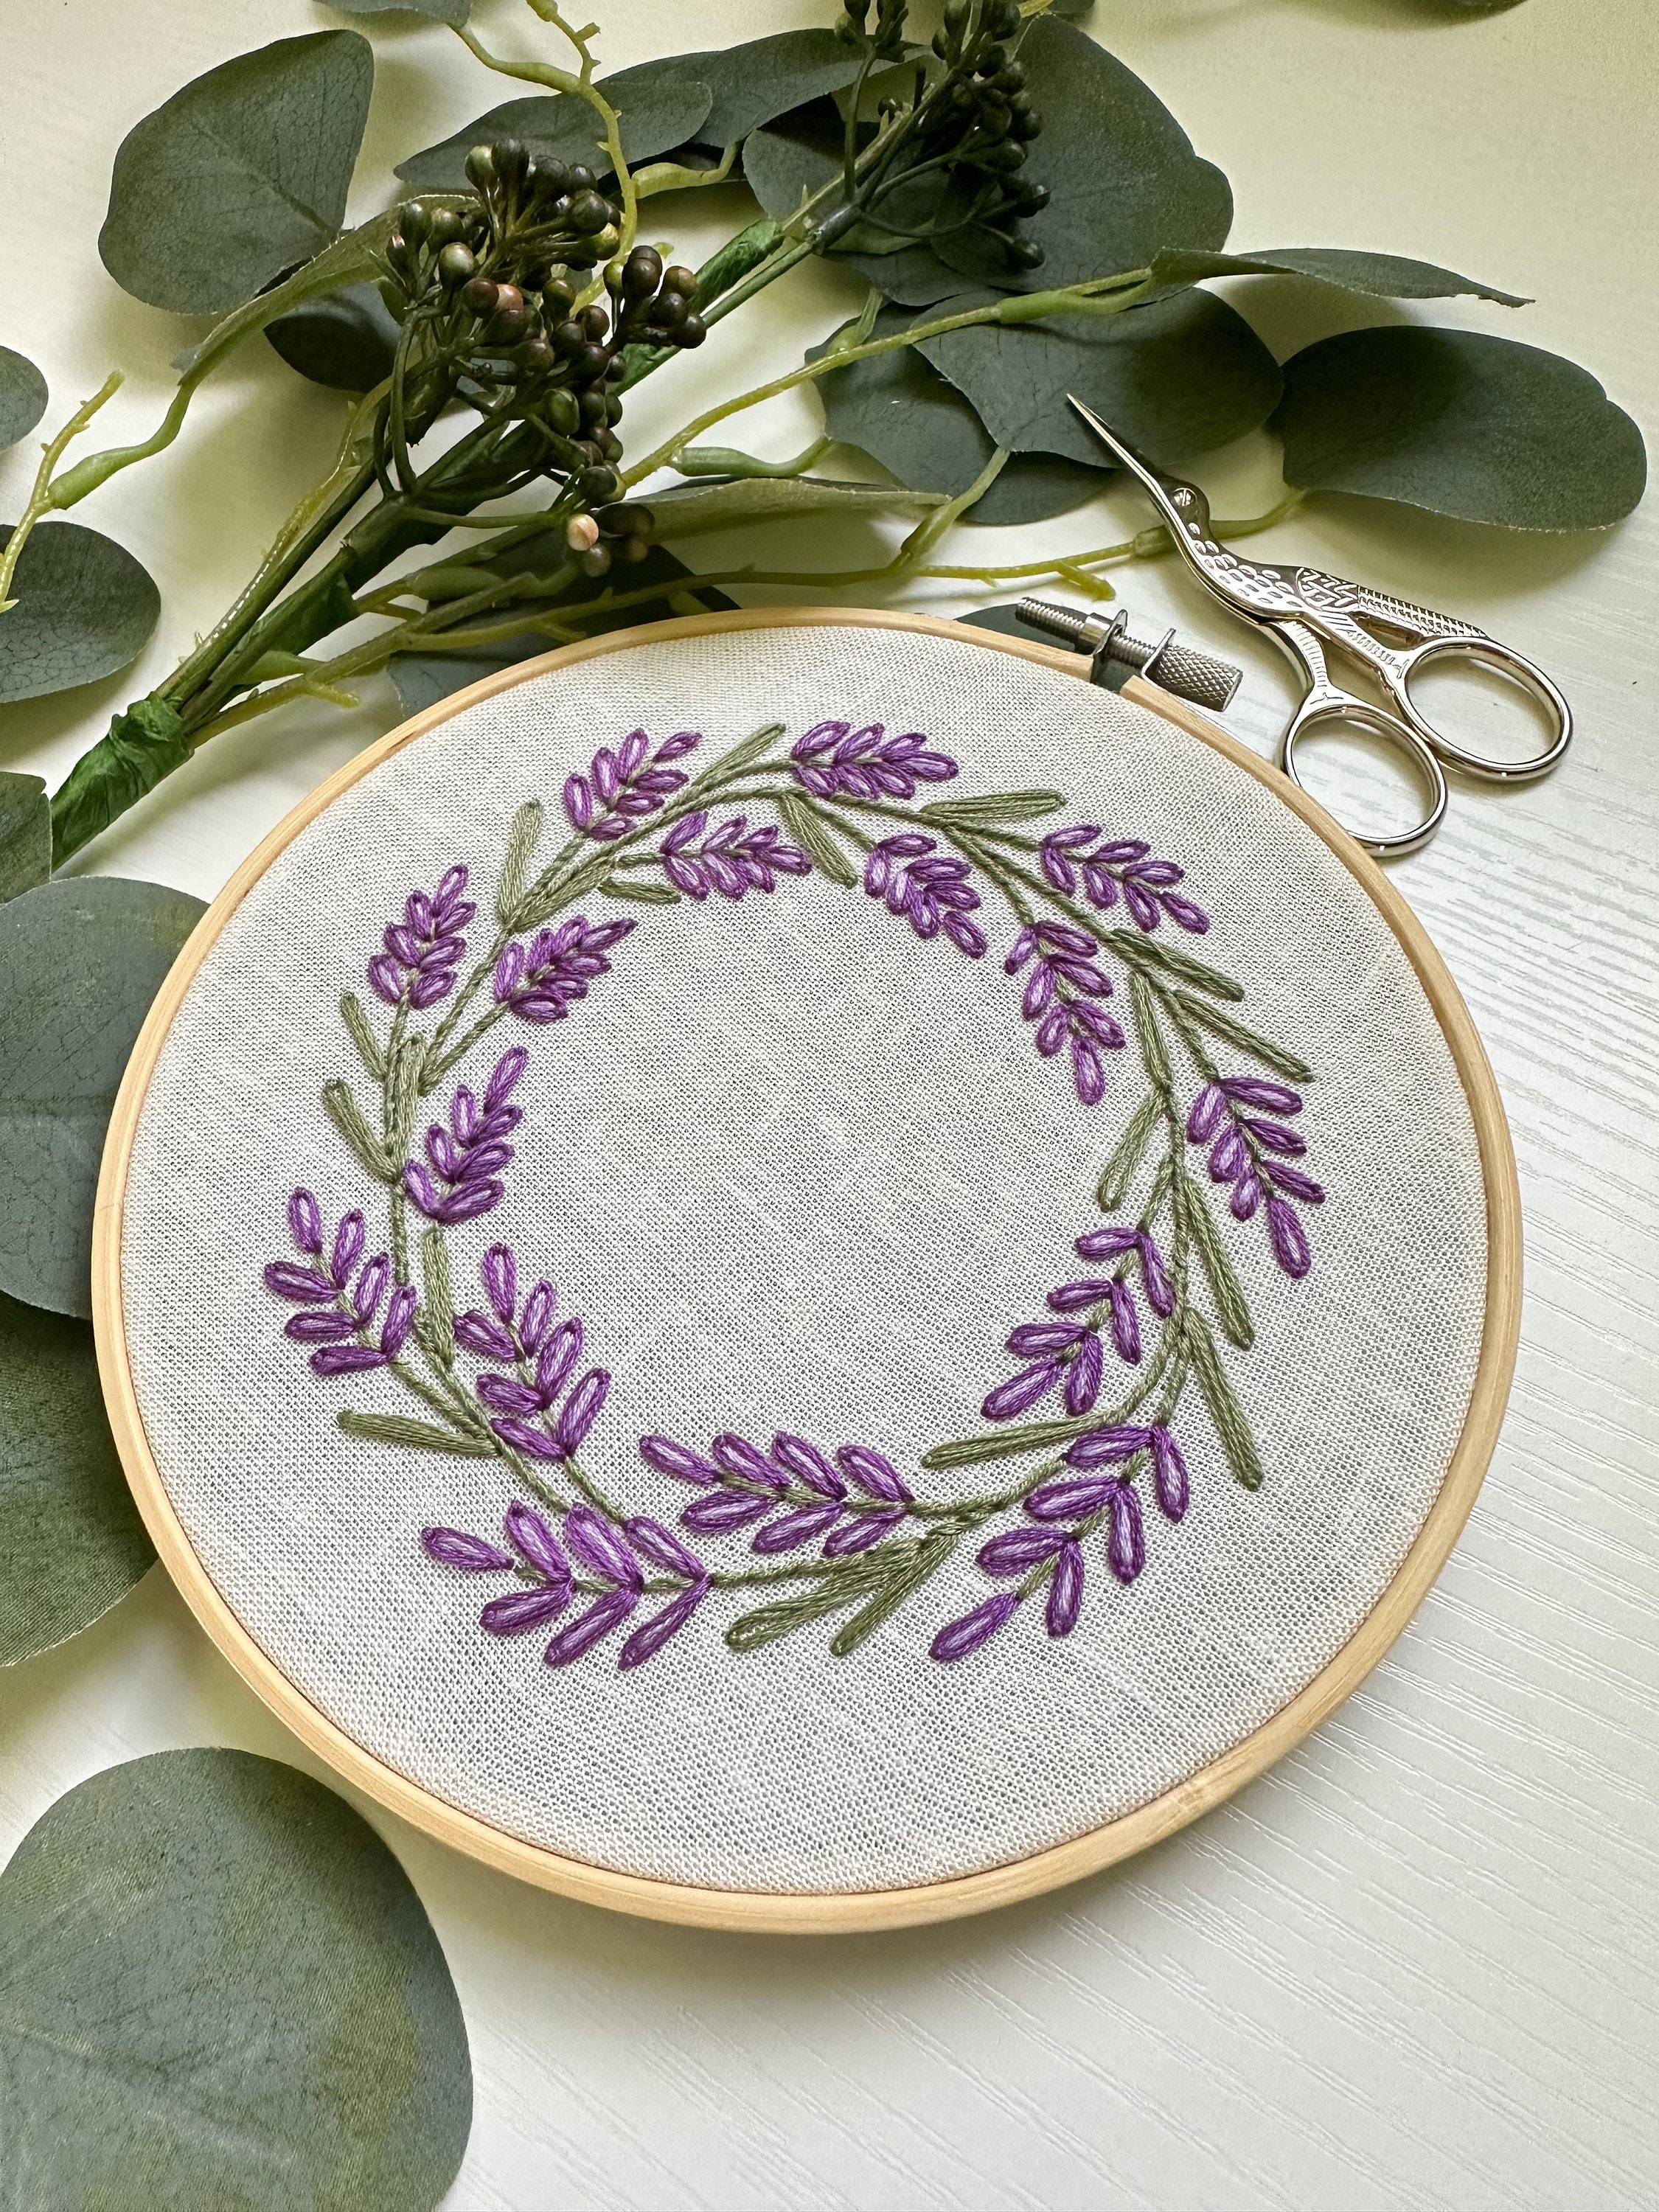 My favorite way to transfer an embroidery pattern - And Other Adventures  Embroidery Co